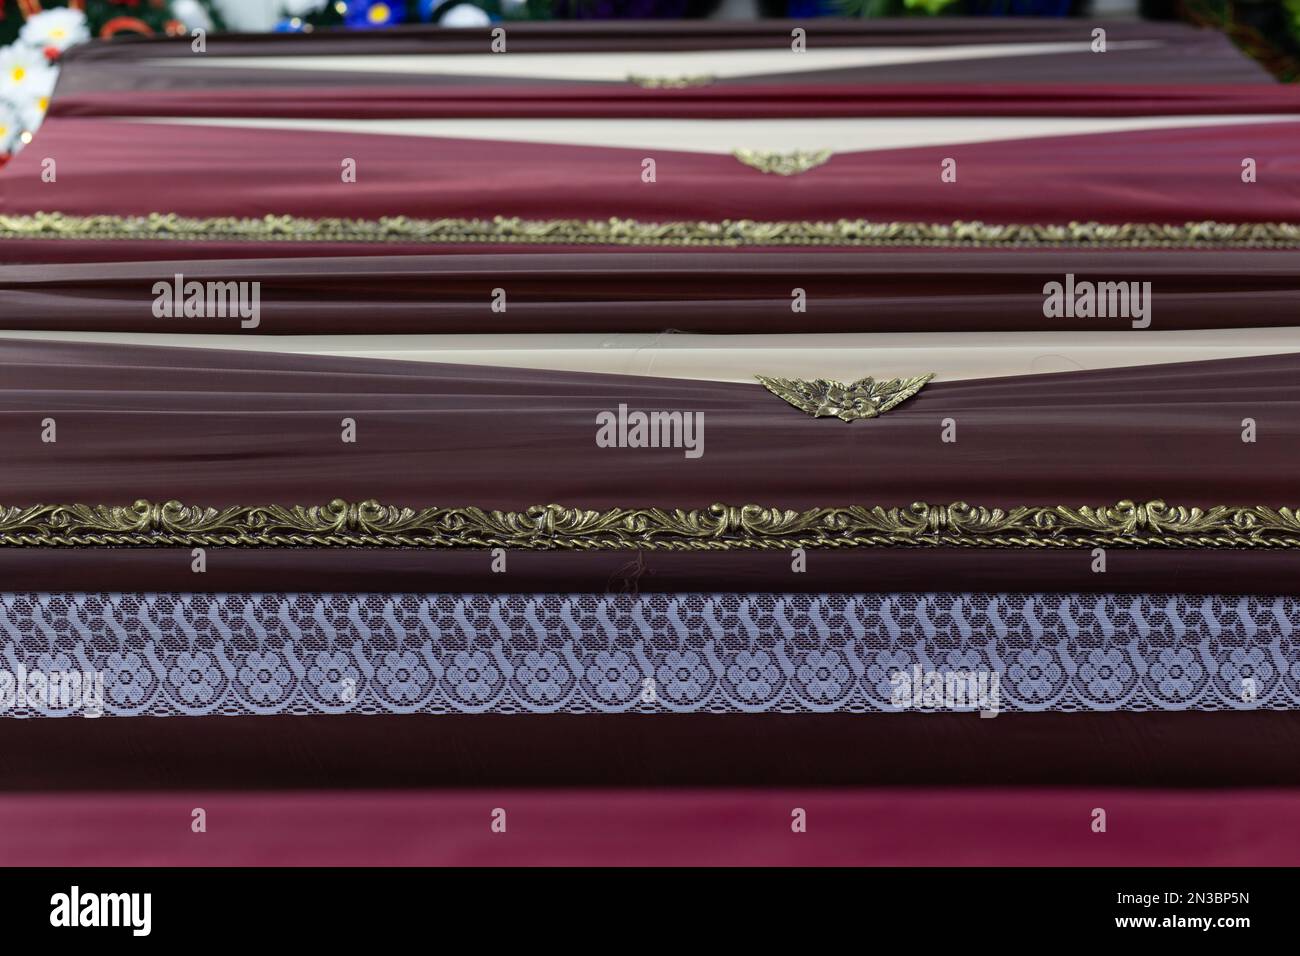 Background of coffin lids in a funeral goods store. Coffin lids are decorated with decorative elements and trimmed with fabric. Stock Photo